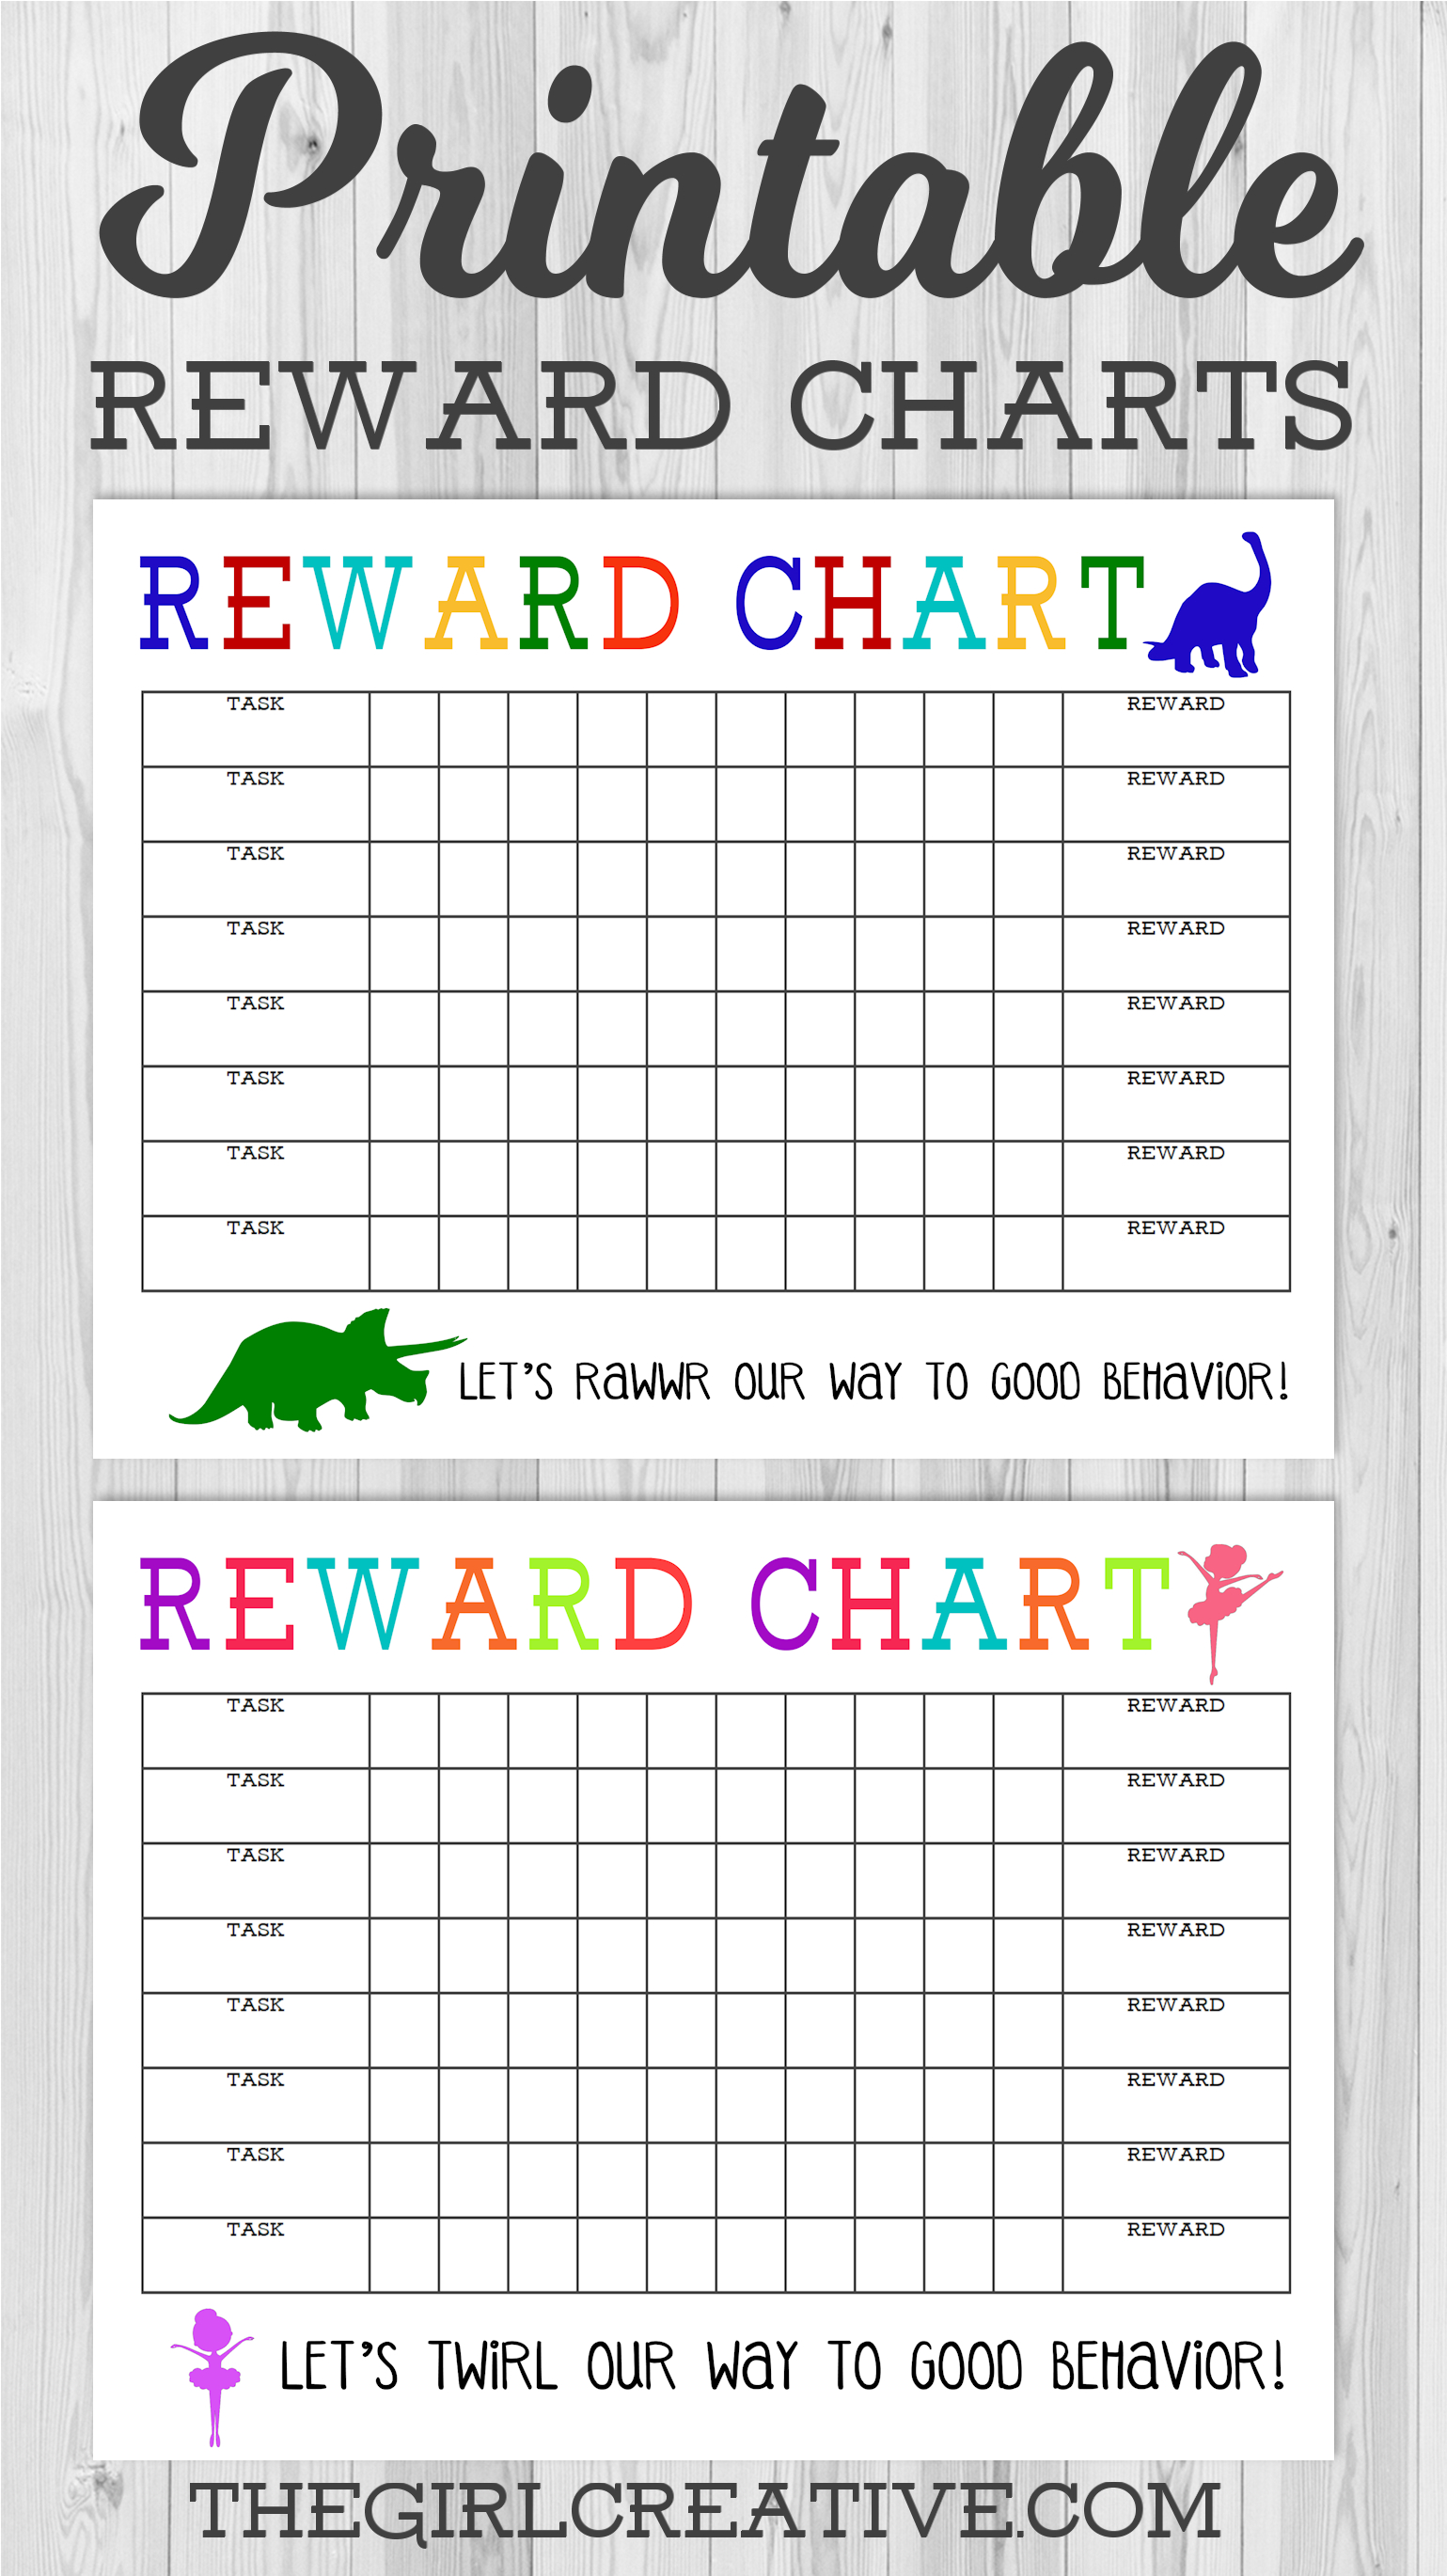 Printable Reward Chart | Share Today's Craft And Diy Ideas | Reward - Free Printable Reward Charts